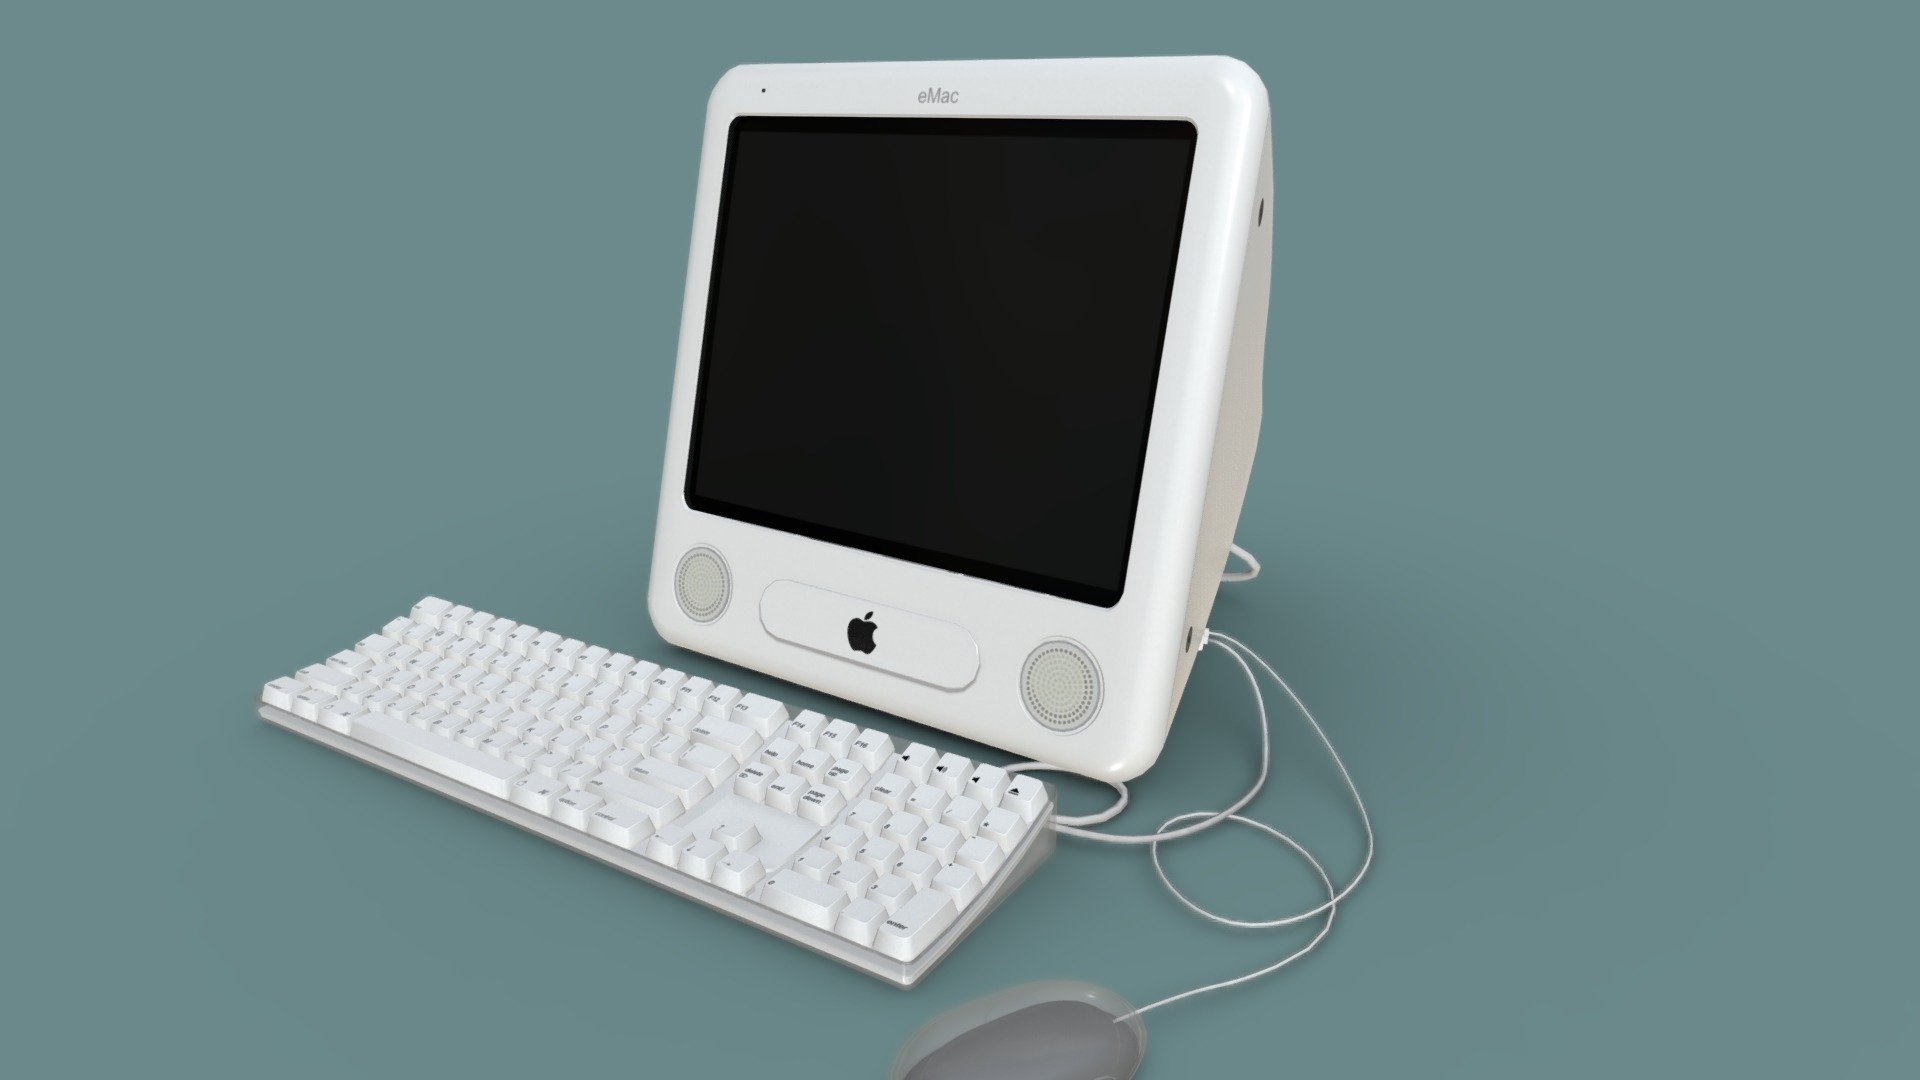 The eMac, short for education Mac, is an all-in-one Macintosh desktop computer that was produced and designed by Apple Computer, Inc. Released in 2002, it was originally aimed at the education market, but was later made available as a cheaper mass-market alternative to Apple's second-generation LCD iMac G4. wikipedia

Commission Model.

Made in Blender and Substance Painter - Apple Emac G4 - 3D model by Unconid 3d model